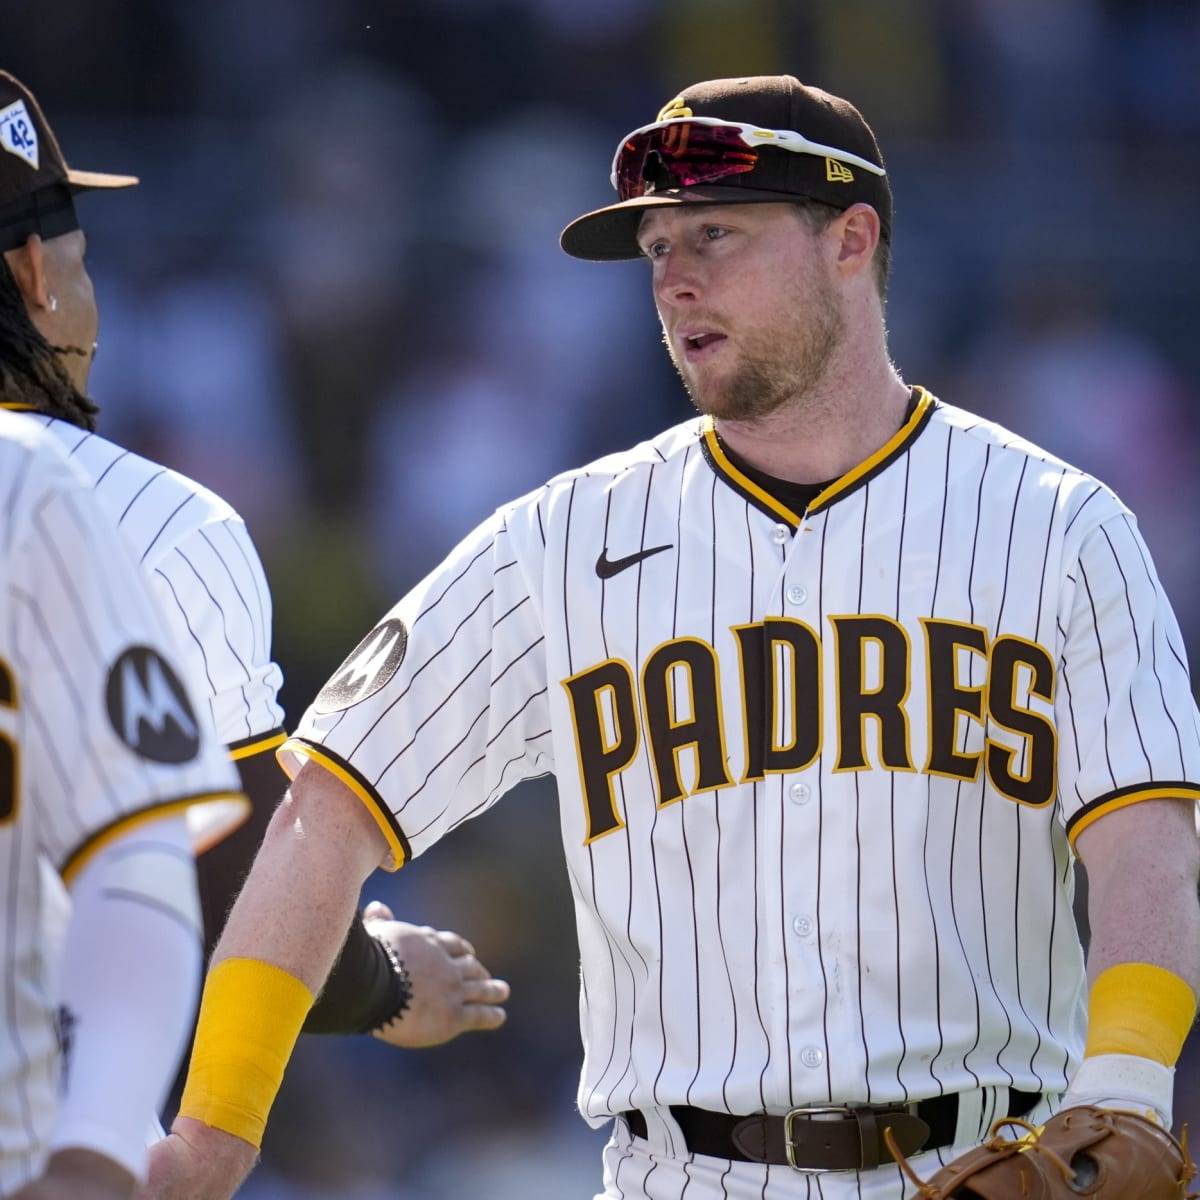 Padres News: Jake Cronenworth Makes History in Blowout Win - Sports  Illustrated Inside The Padres News, Analysis and More